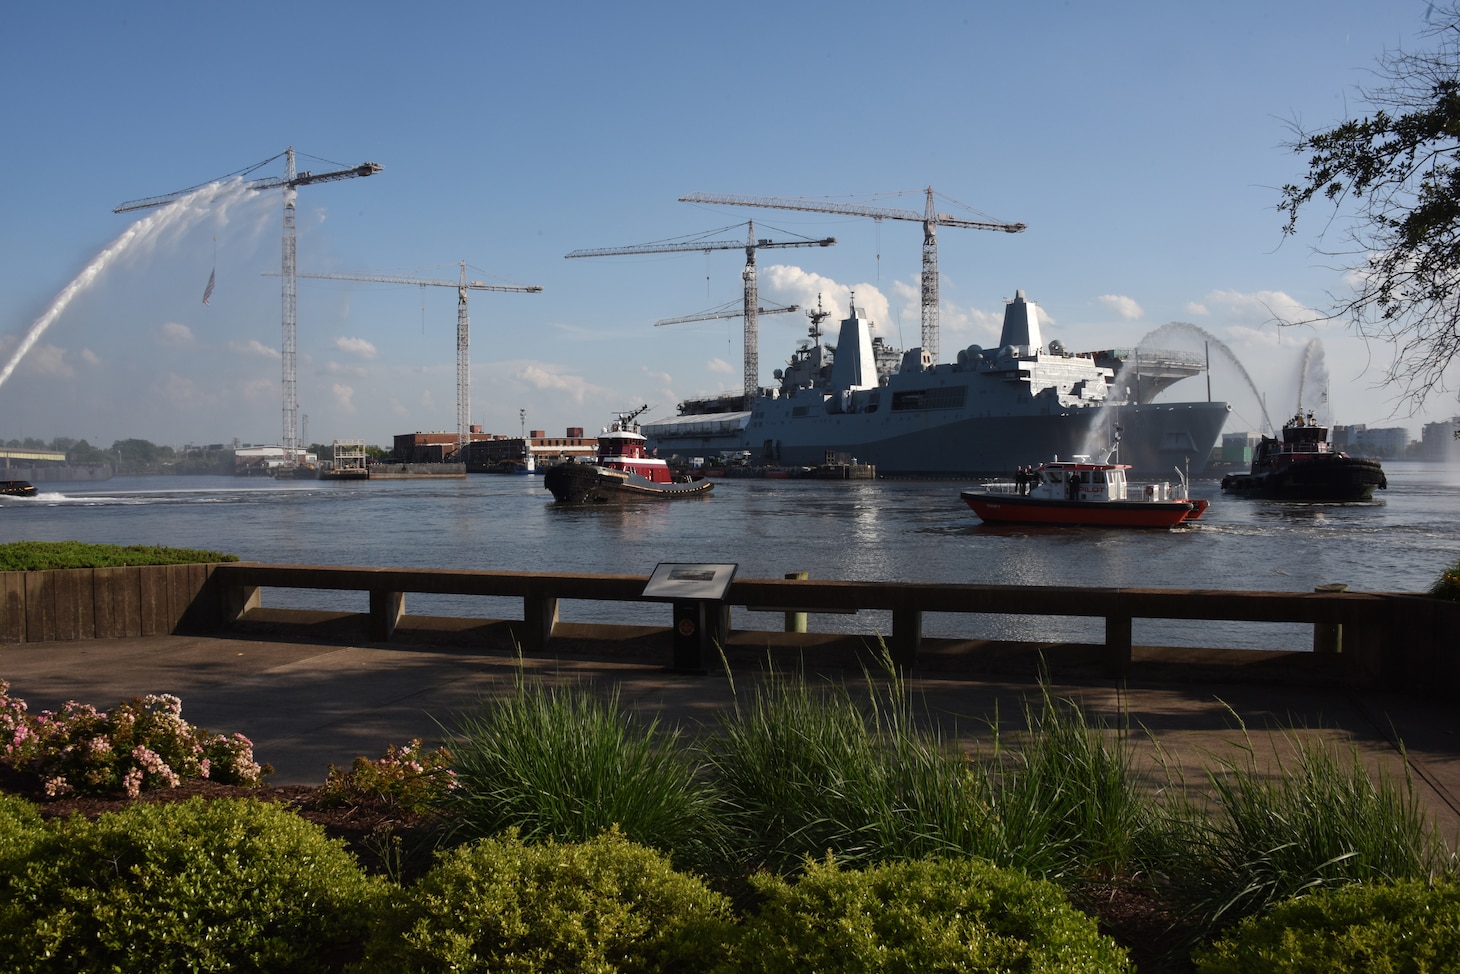 Tugboats jettison water into the air during a ‘water salute’ held in honor of National Maritime Day in downtown Norfolk, Virginia, May 19.